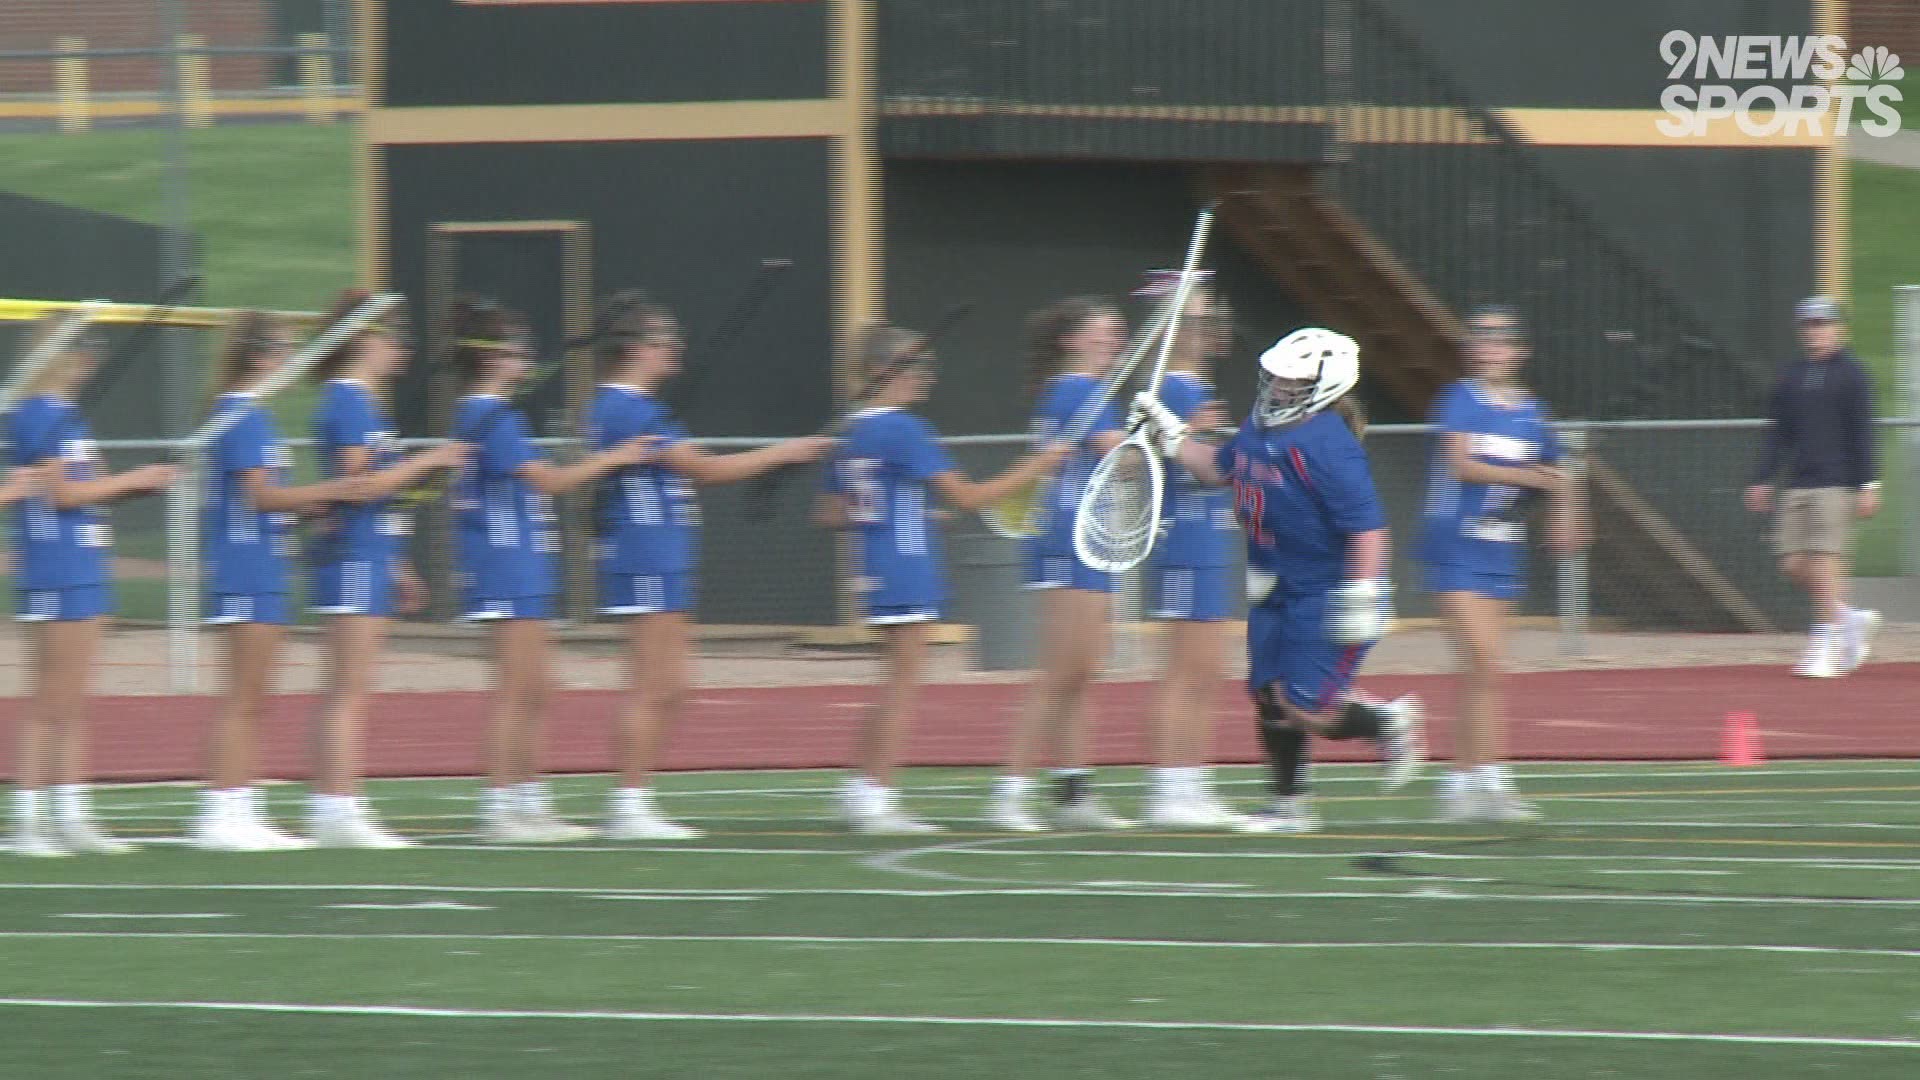 The Bruins showed why they're one of the best teams in the state on Wednesday night, beating the Warriors 19-4.